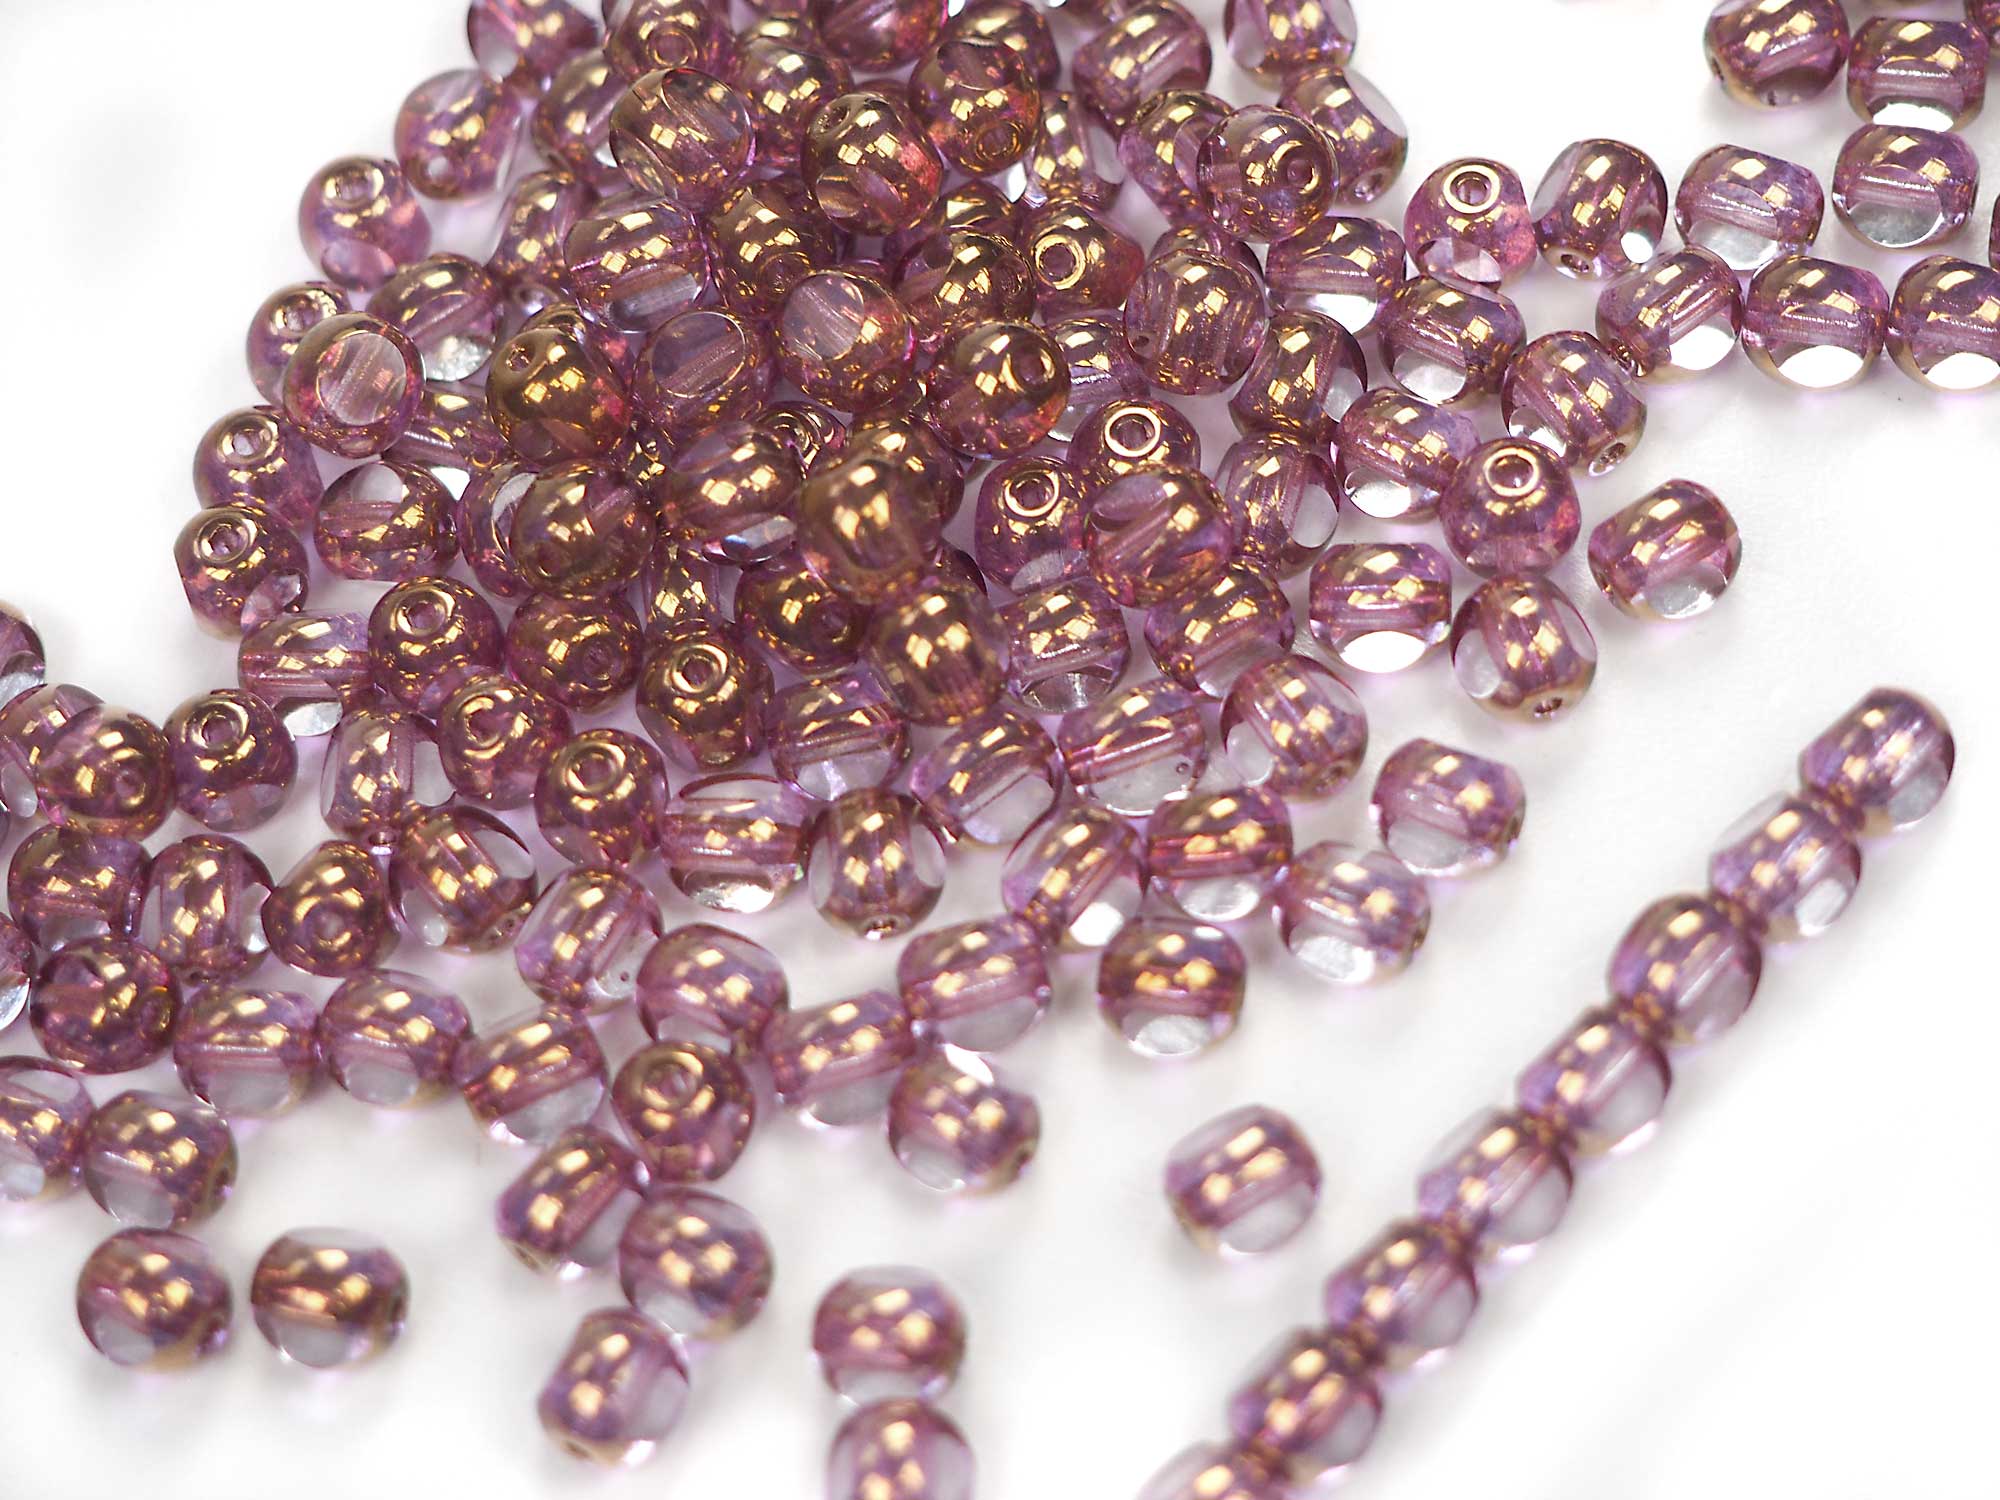 Czech Glass 3-Cut Round Window Beads (Soccer Ball Bead) Art. 151-19501 in size 6mm, Crystal Pink Bronze Picasso coating, 50pcs, P873